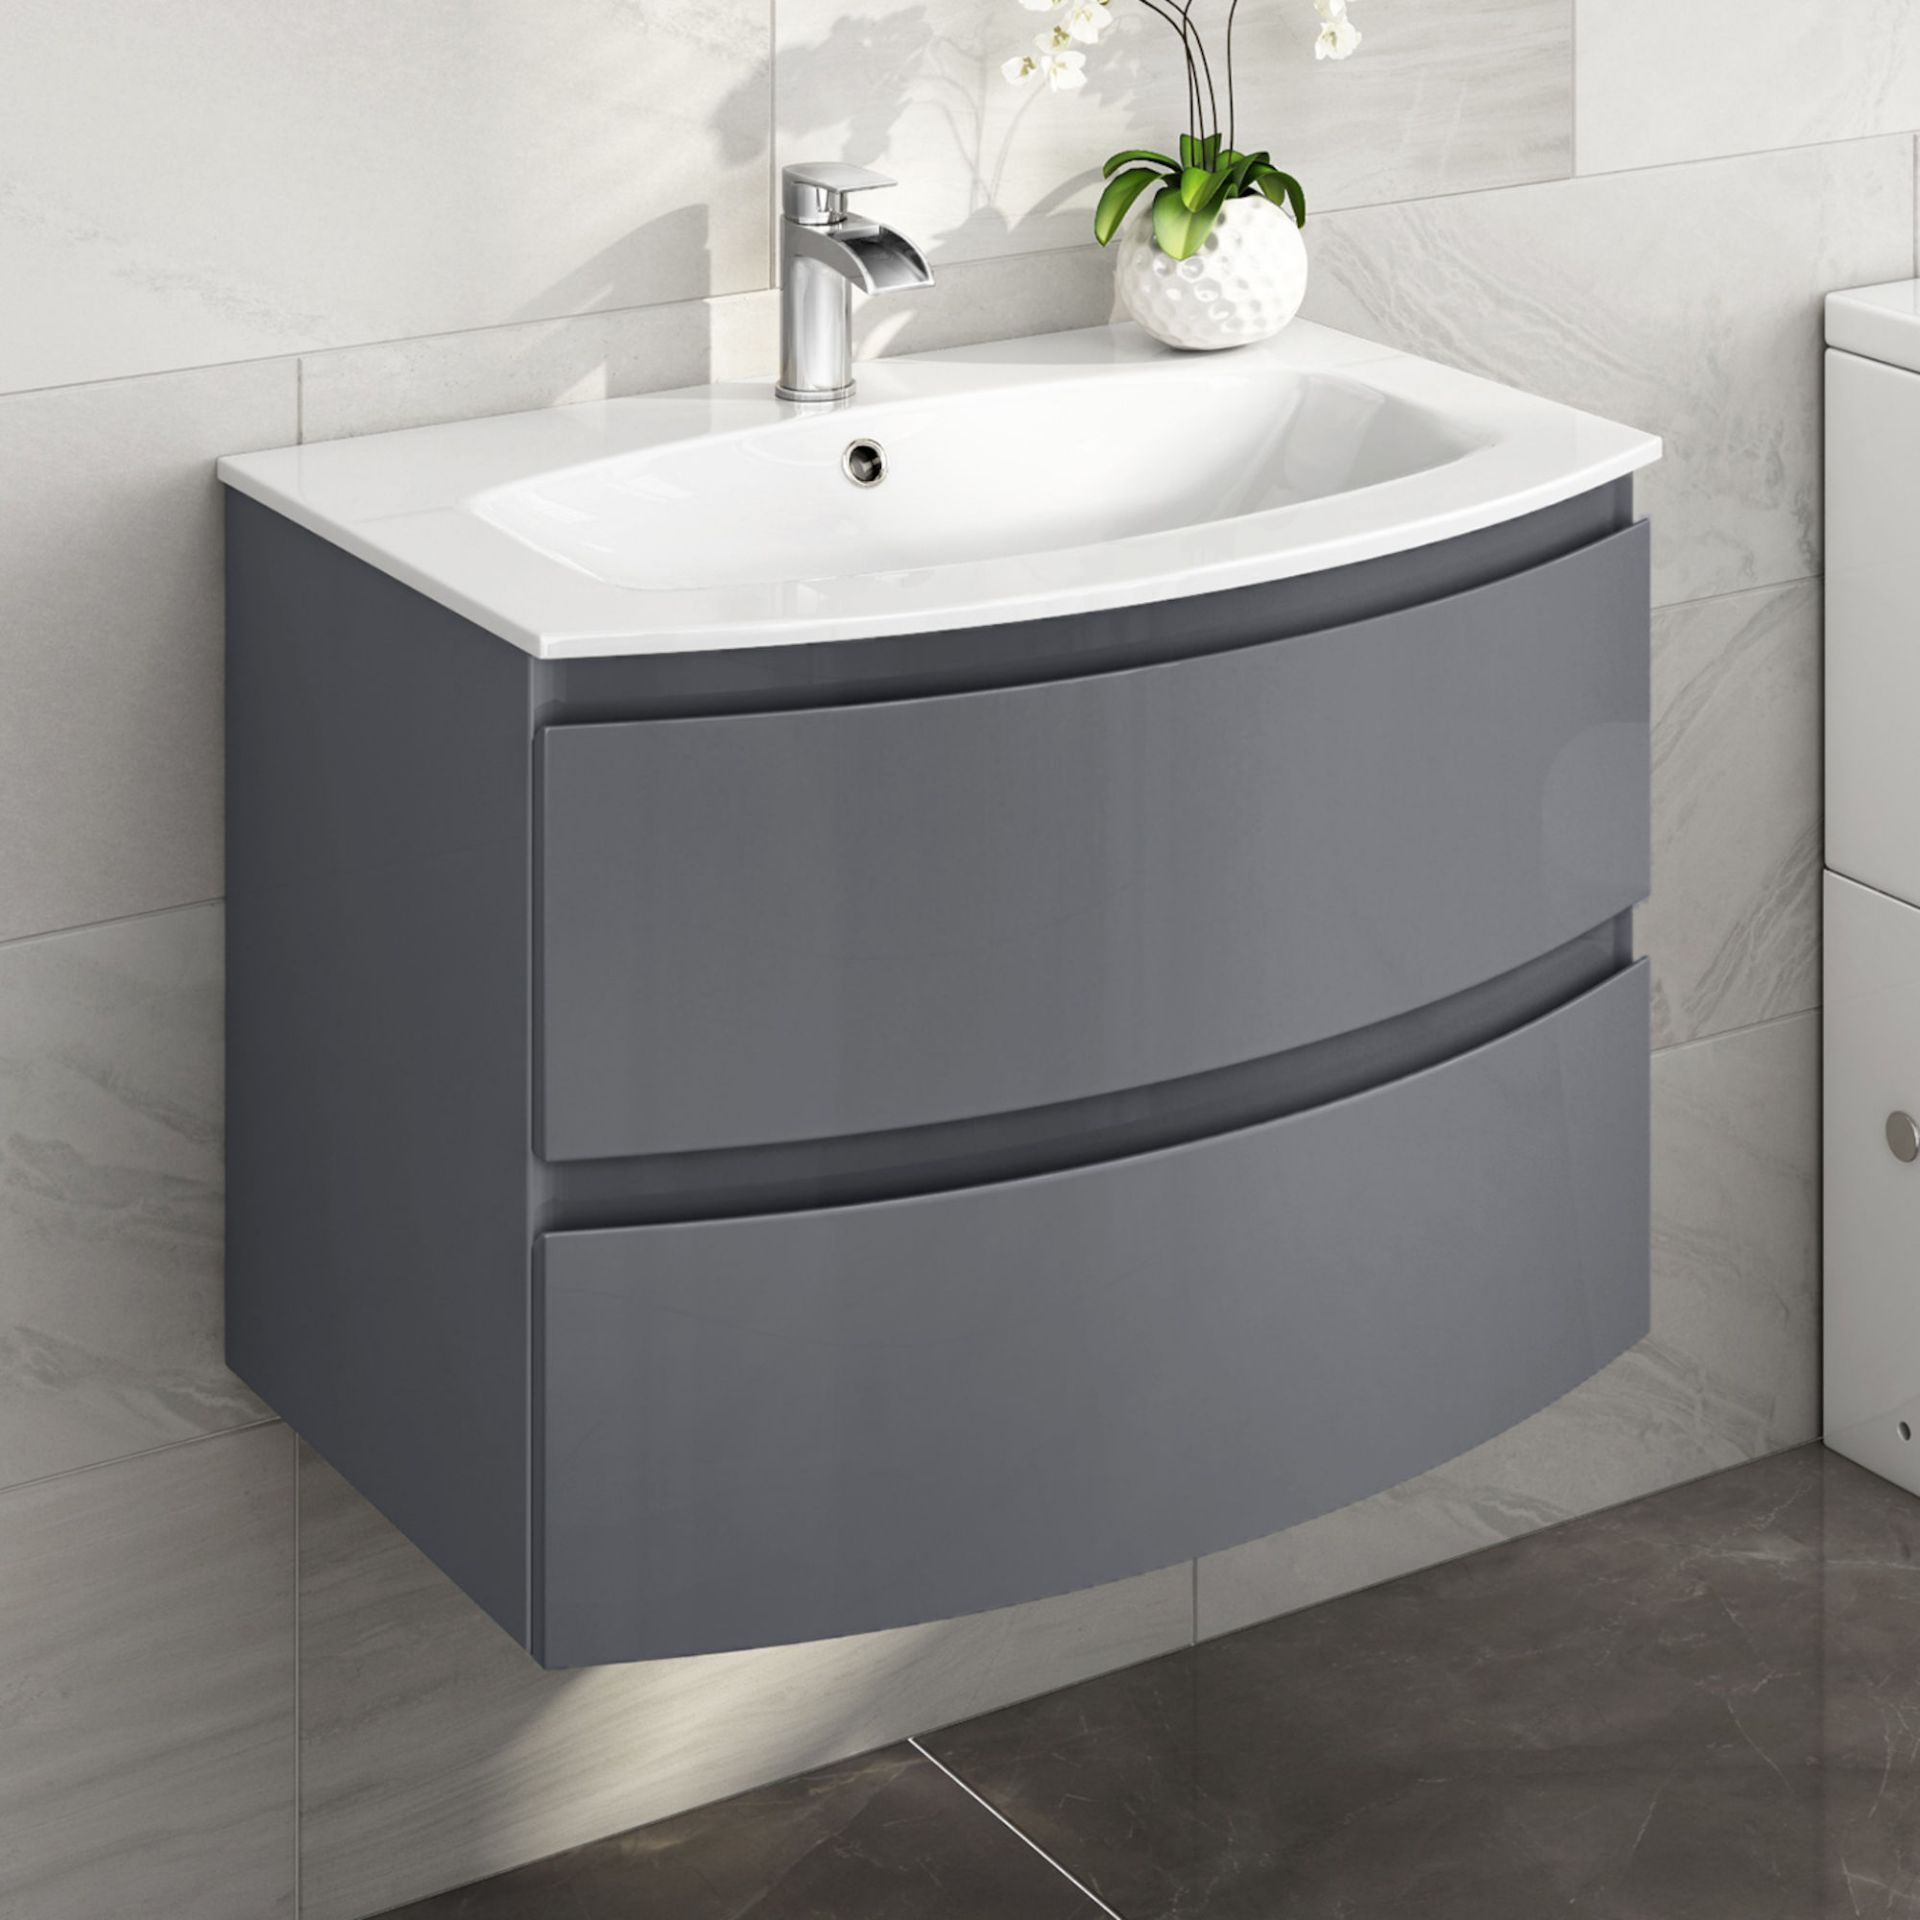 BRAND NEW BOXED 700mm Amelie Gloss Grey Curved Vanity Unit - Wall Hung. RRP £599.99. Comes